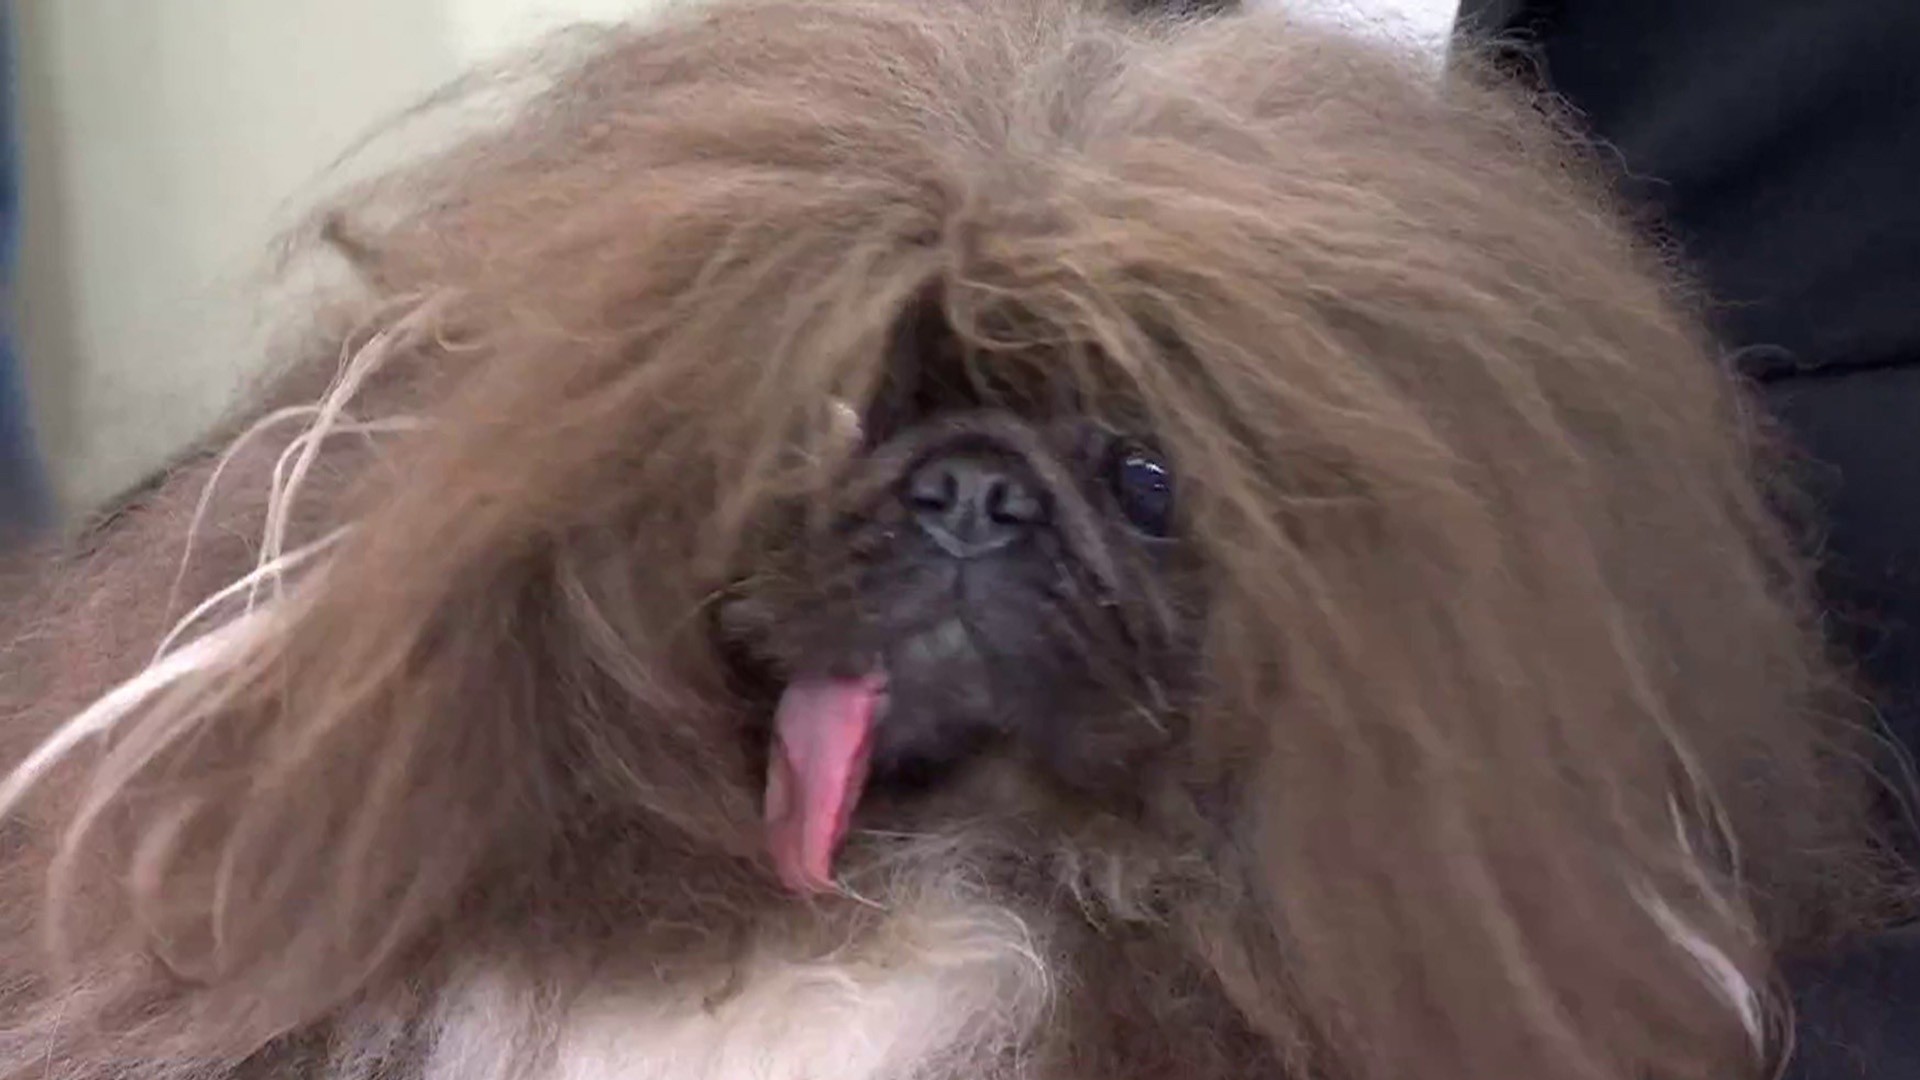 Meet Wild Thang, crowned the World's Ugliest Dog after 5 tries